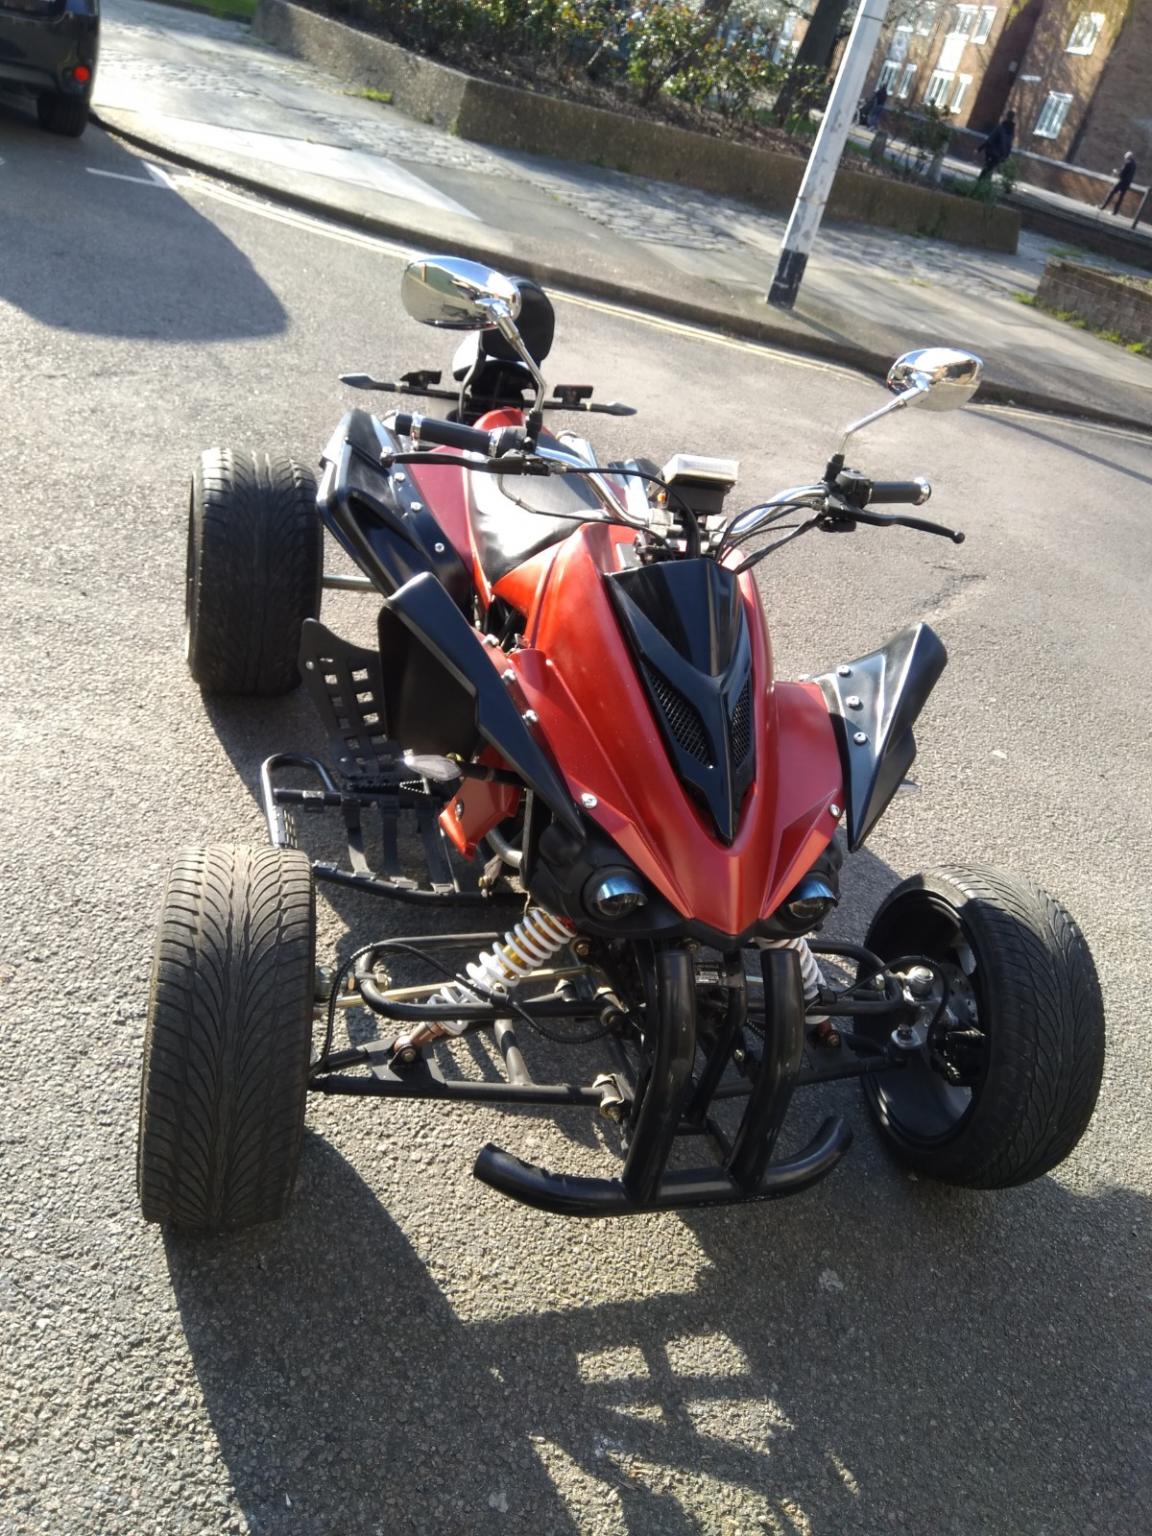 JINLING QUAD BIKE 250CC in SE1 London for £2,100.00 for